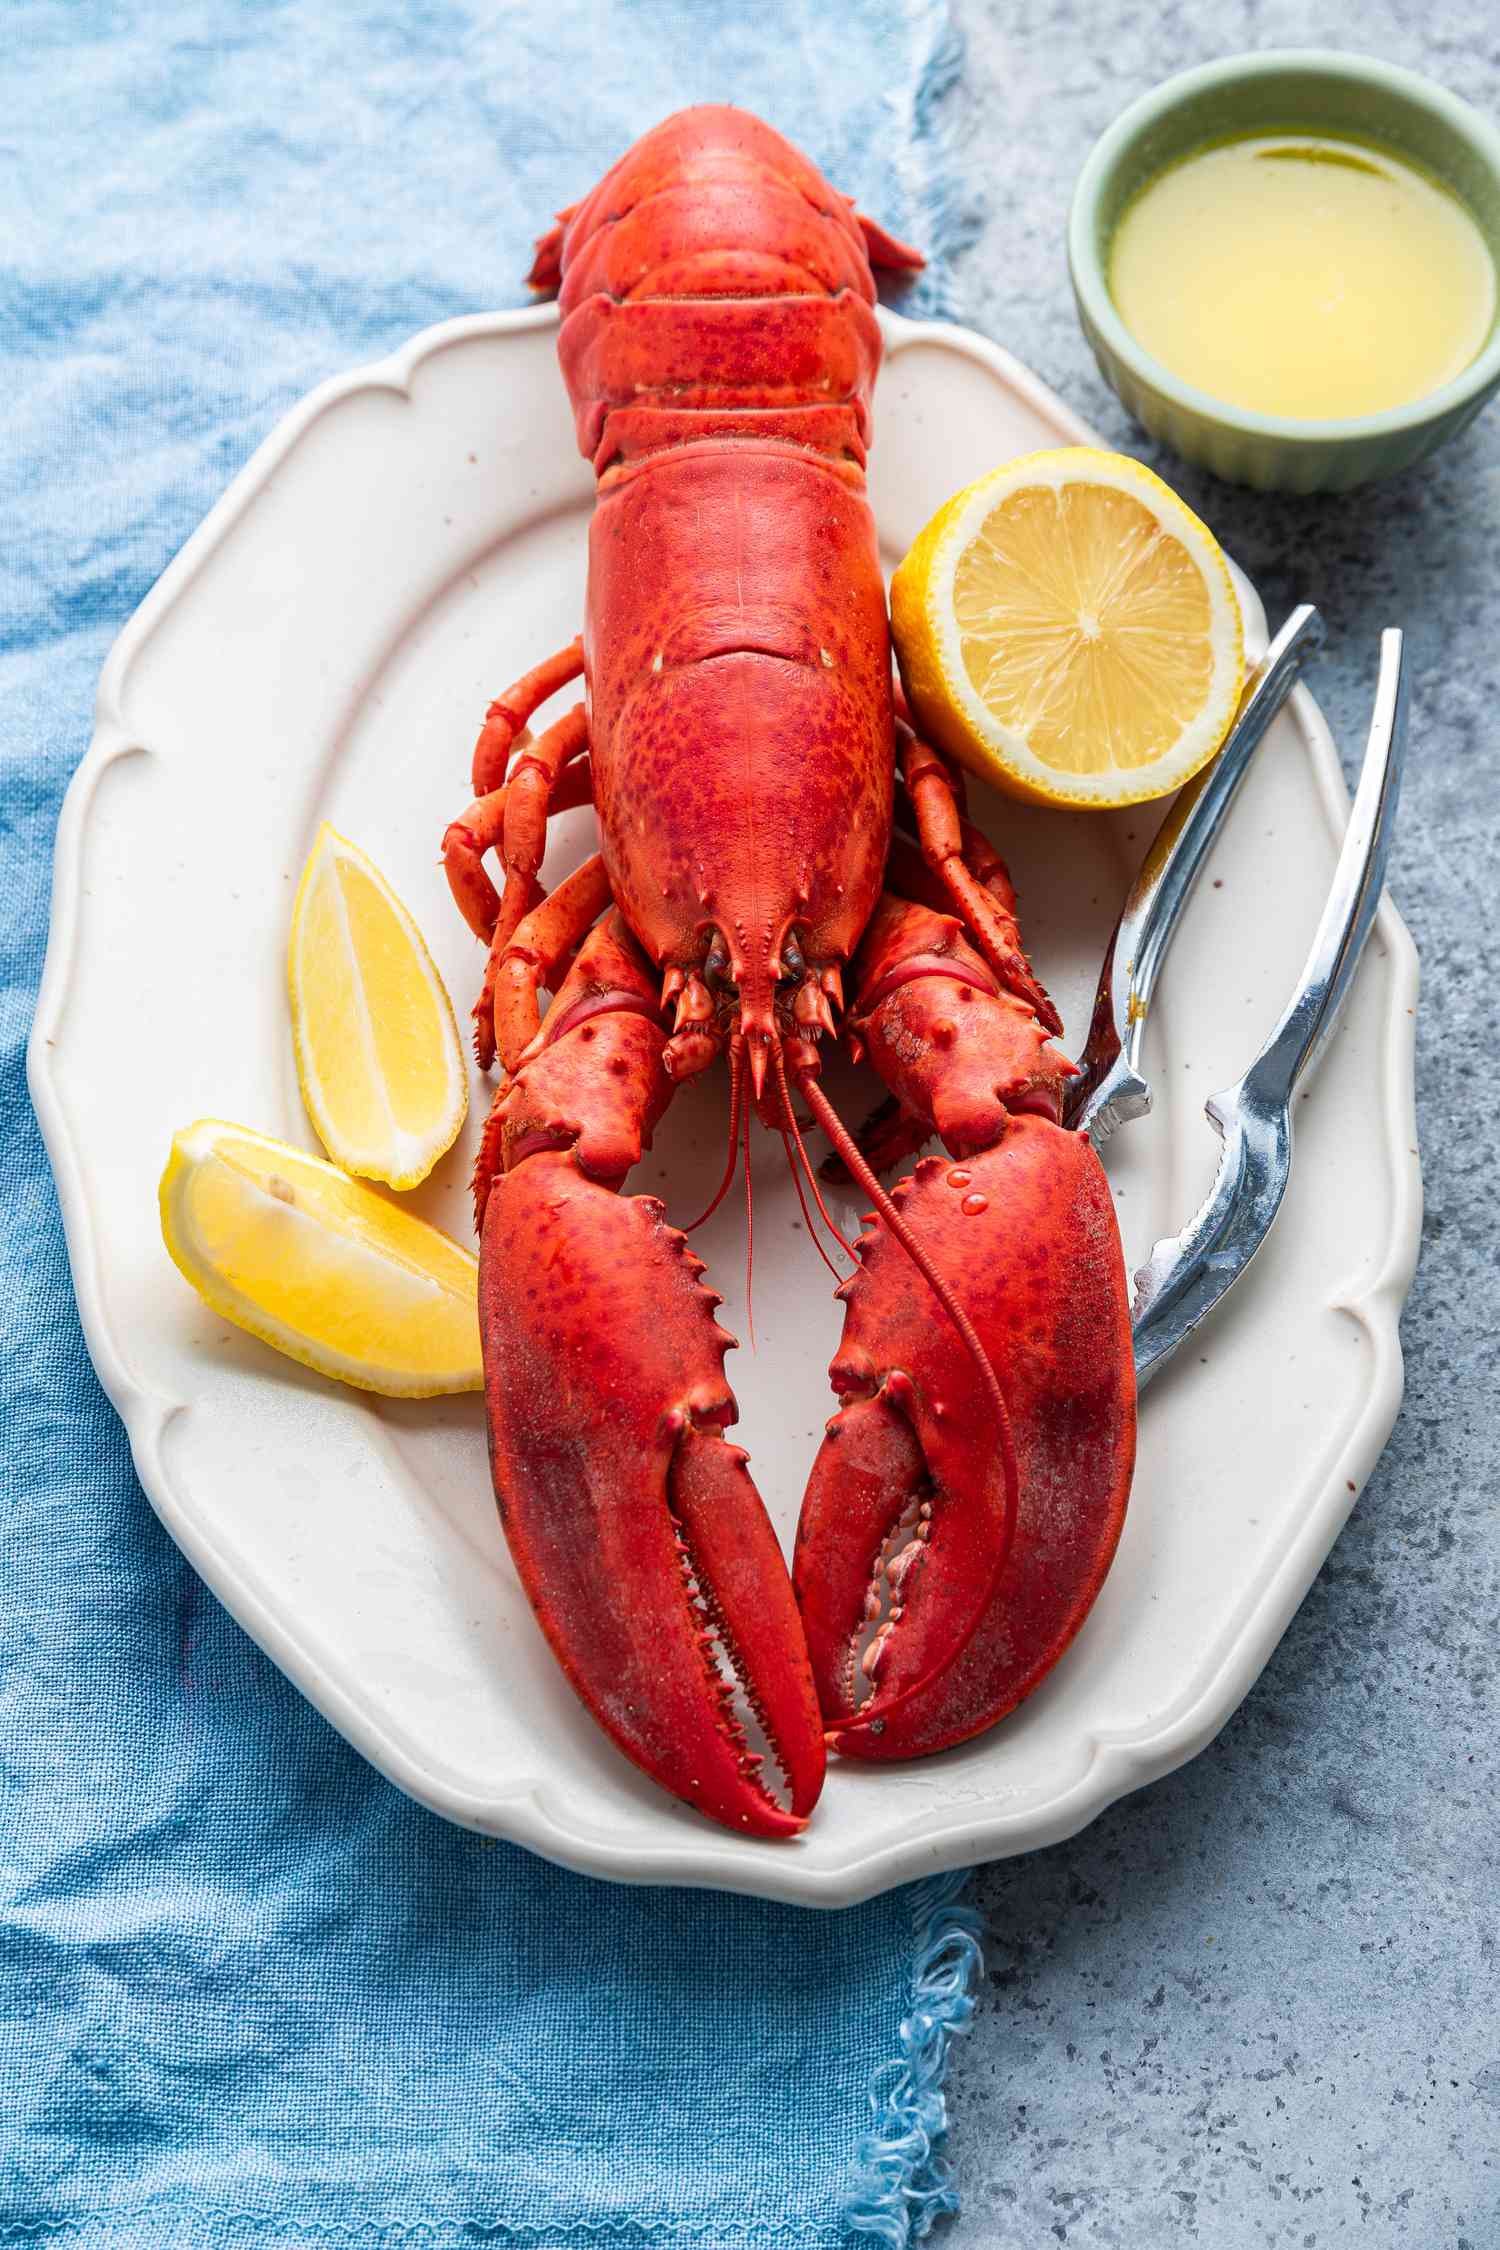 Simply-Recipes-How-to-Boil-and-Eat-Lobster-LEAD-11-2c9590bc2c0a41e1b9372b31f2c1b4eb.jpg